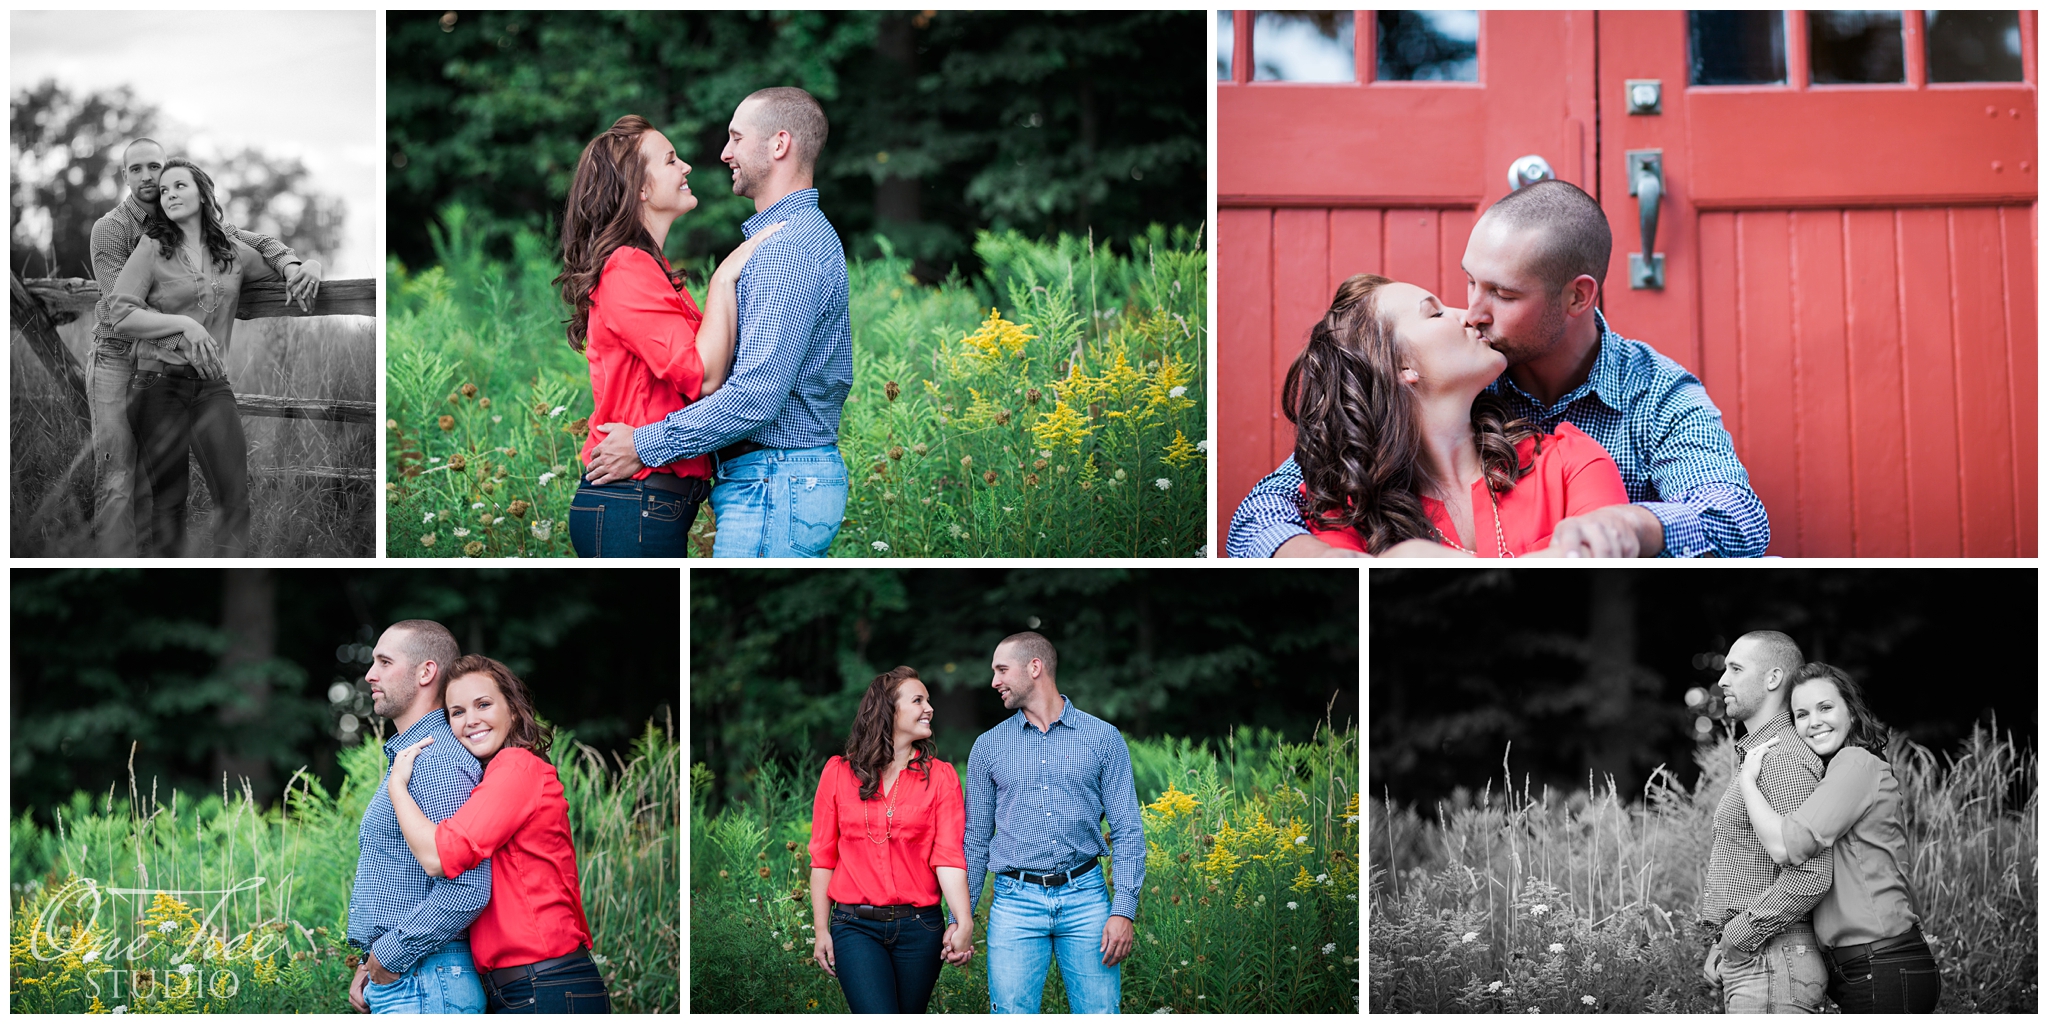 Chad + Carrie | Engagement and Wedding Photographer | Markham and the GTA